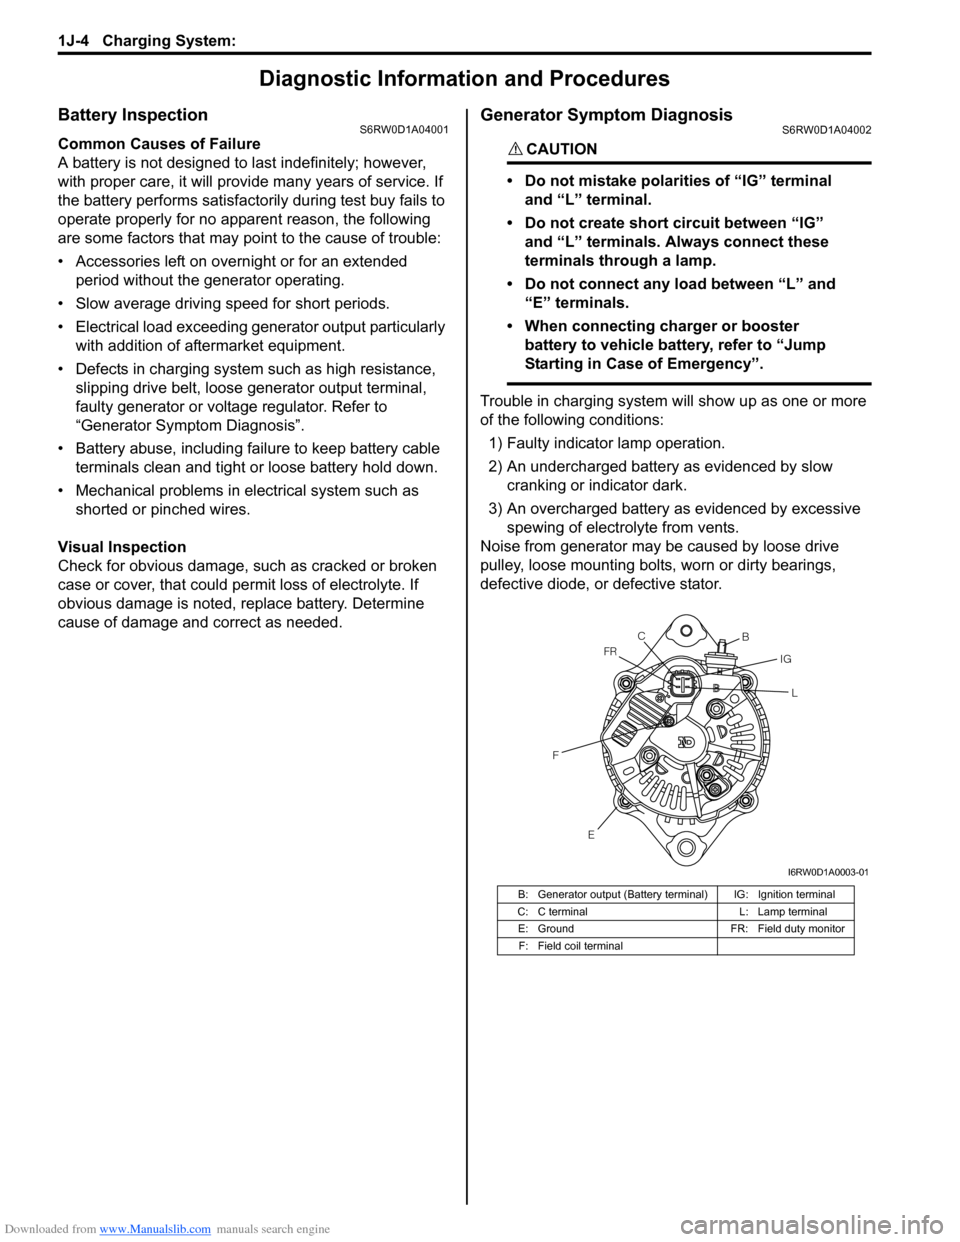 SUZUKI SX4 2006 1.G Service Workshop Manual Downloaded from www.Manualslib.com manuals search engine 1J-4 Charging System: 
Diagnostic Information and Procedures
Battery InspectionS6RW0D1A04001
Common Causes of Failure
A battery is not designed